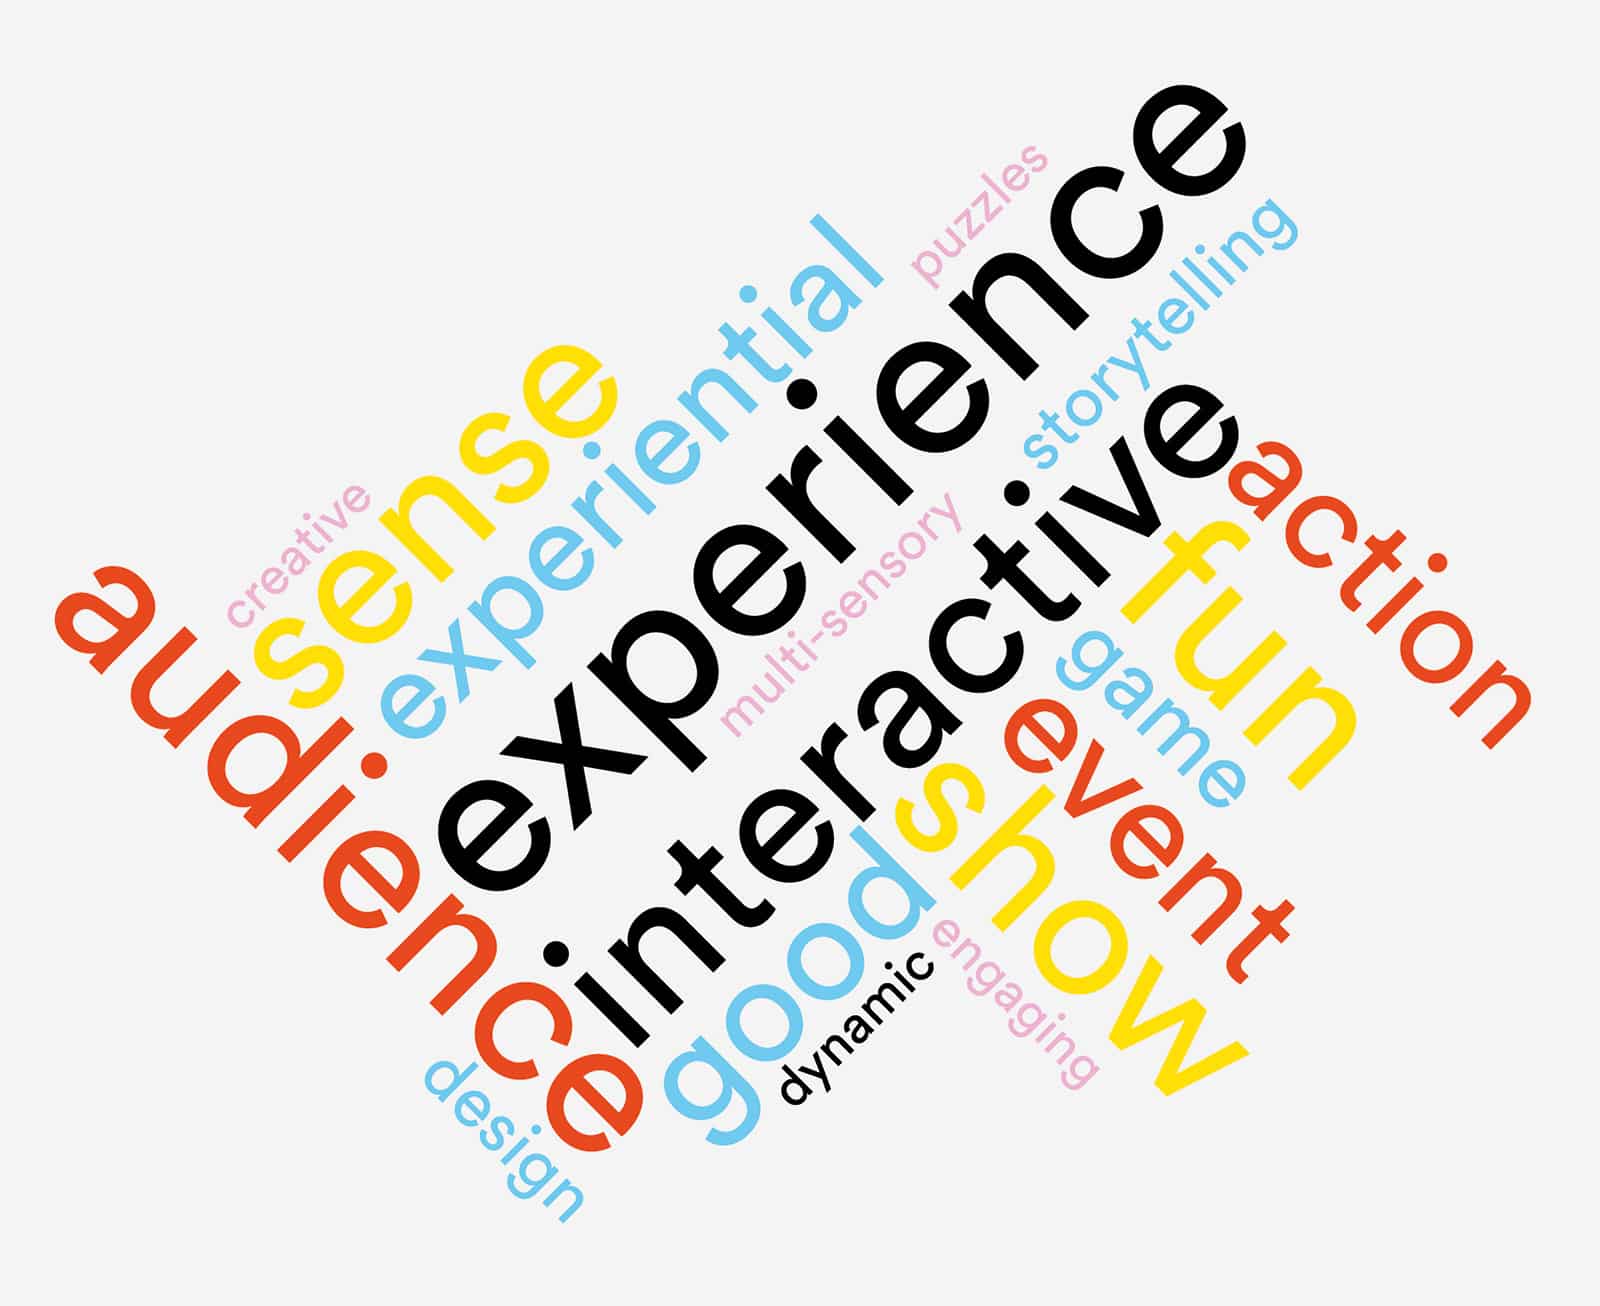 Word cloud of what words audiences associate with immersive